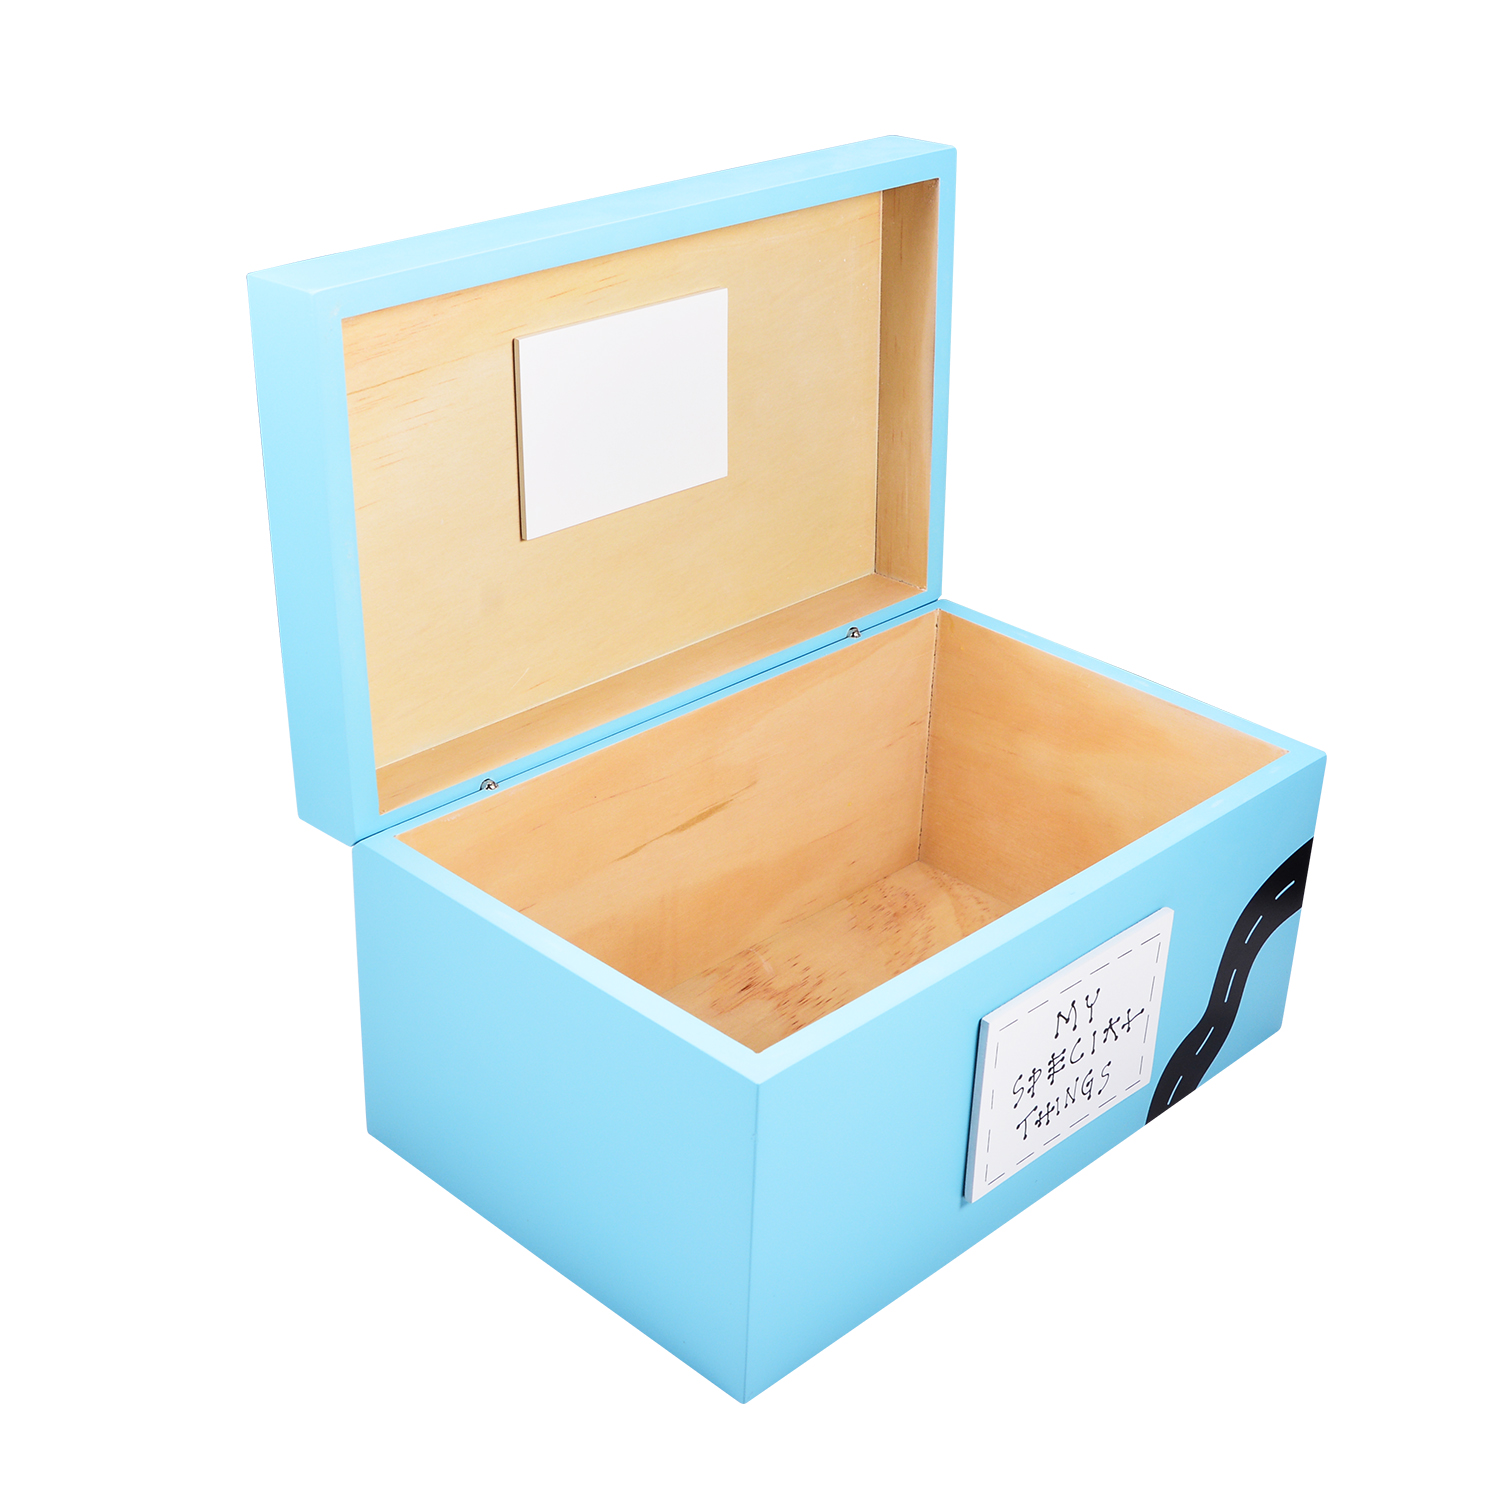  High Quality jewelry box wooden 3